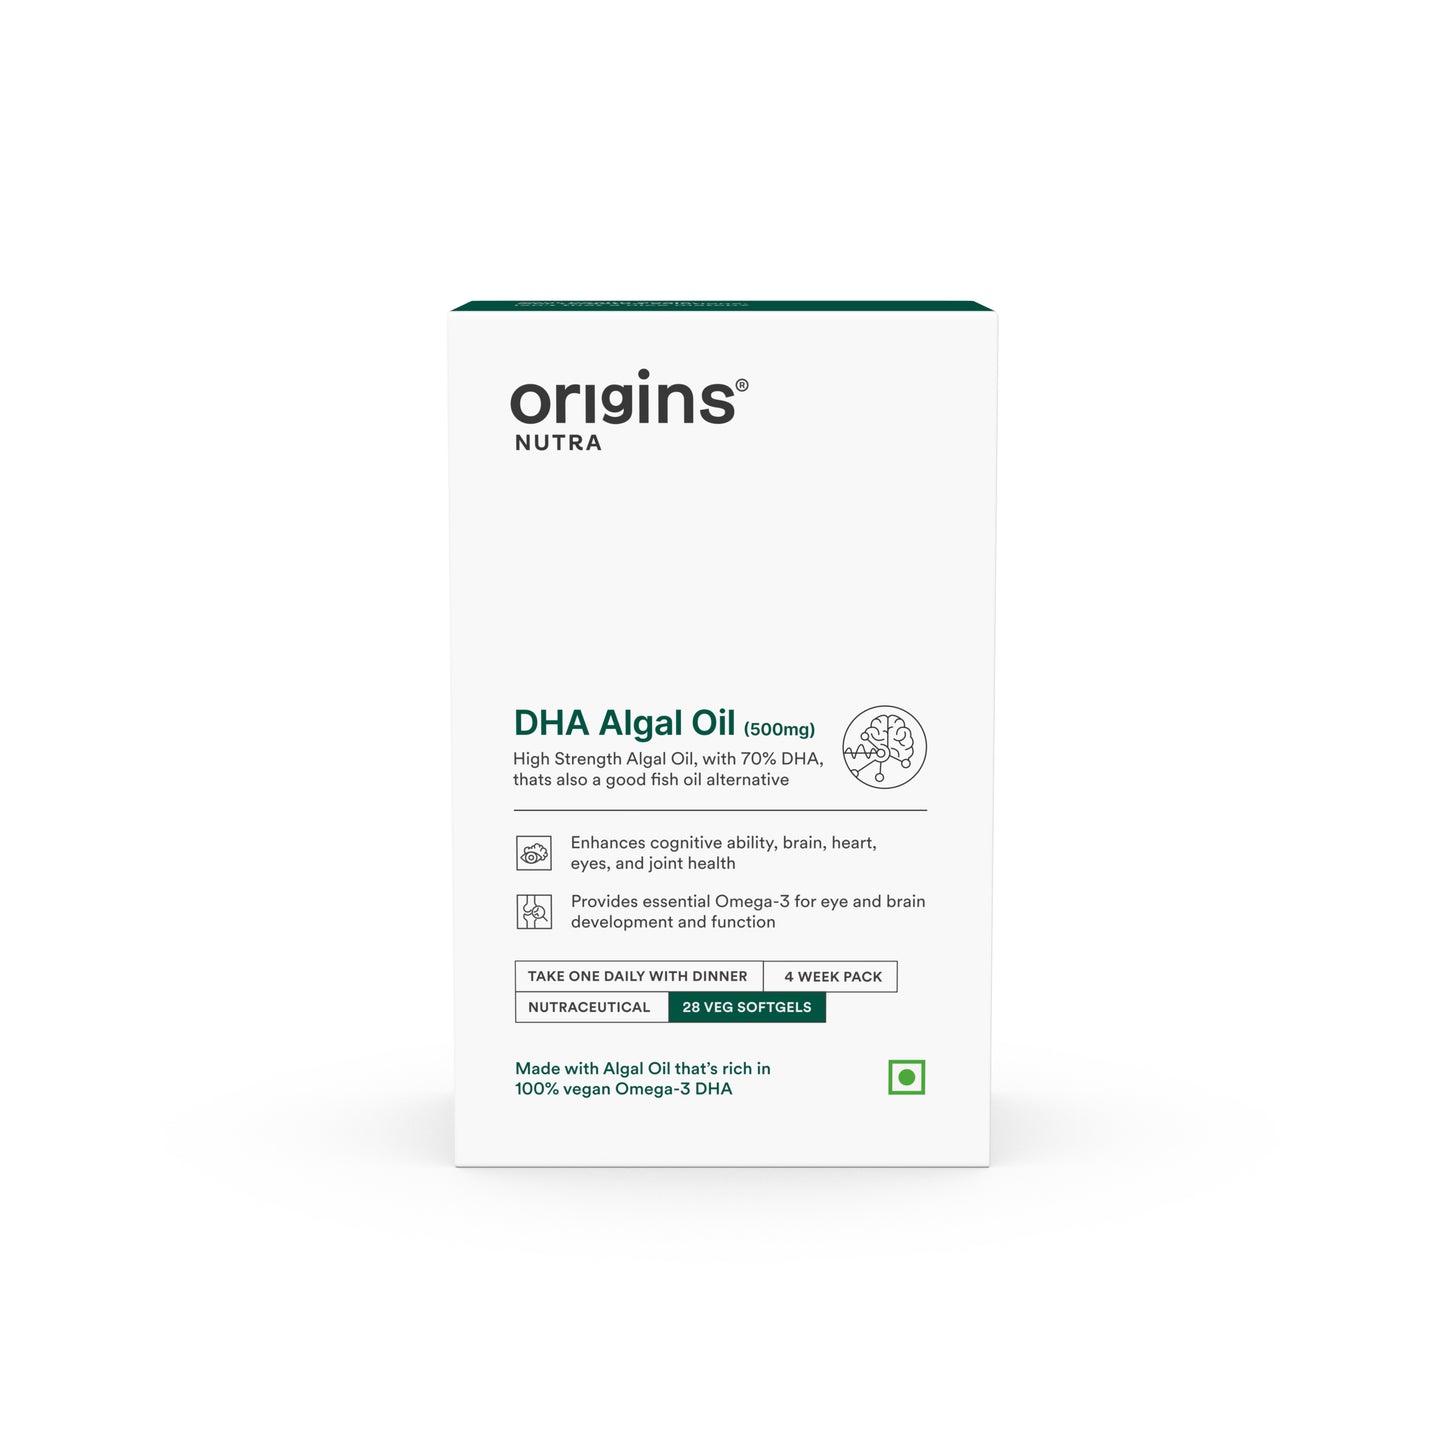 Origins Nutra DHA Algal Oil |Plant-Based High Strength 70% Omega 3 DHA, Plant Based |GMP Certified | Non-GMO |For Men & Women | 28 Softgels |Pack of 3 for 4 Weeks